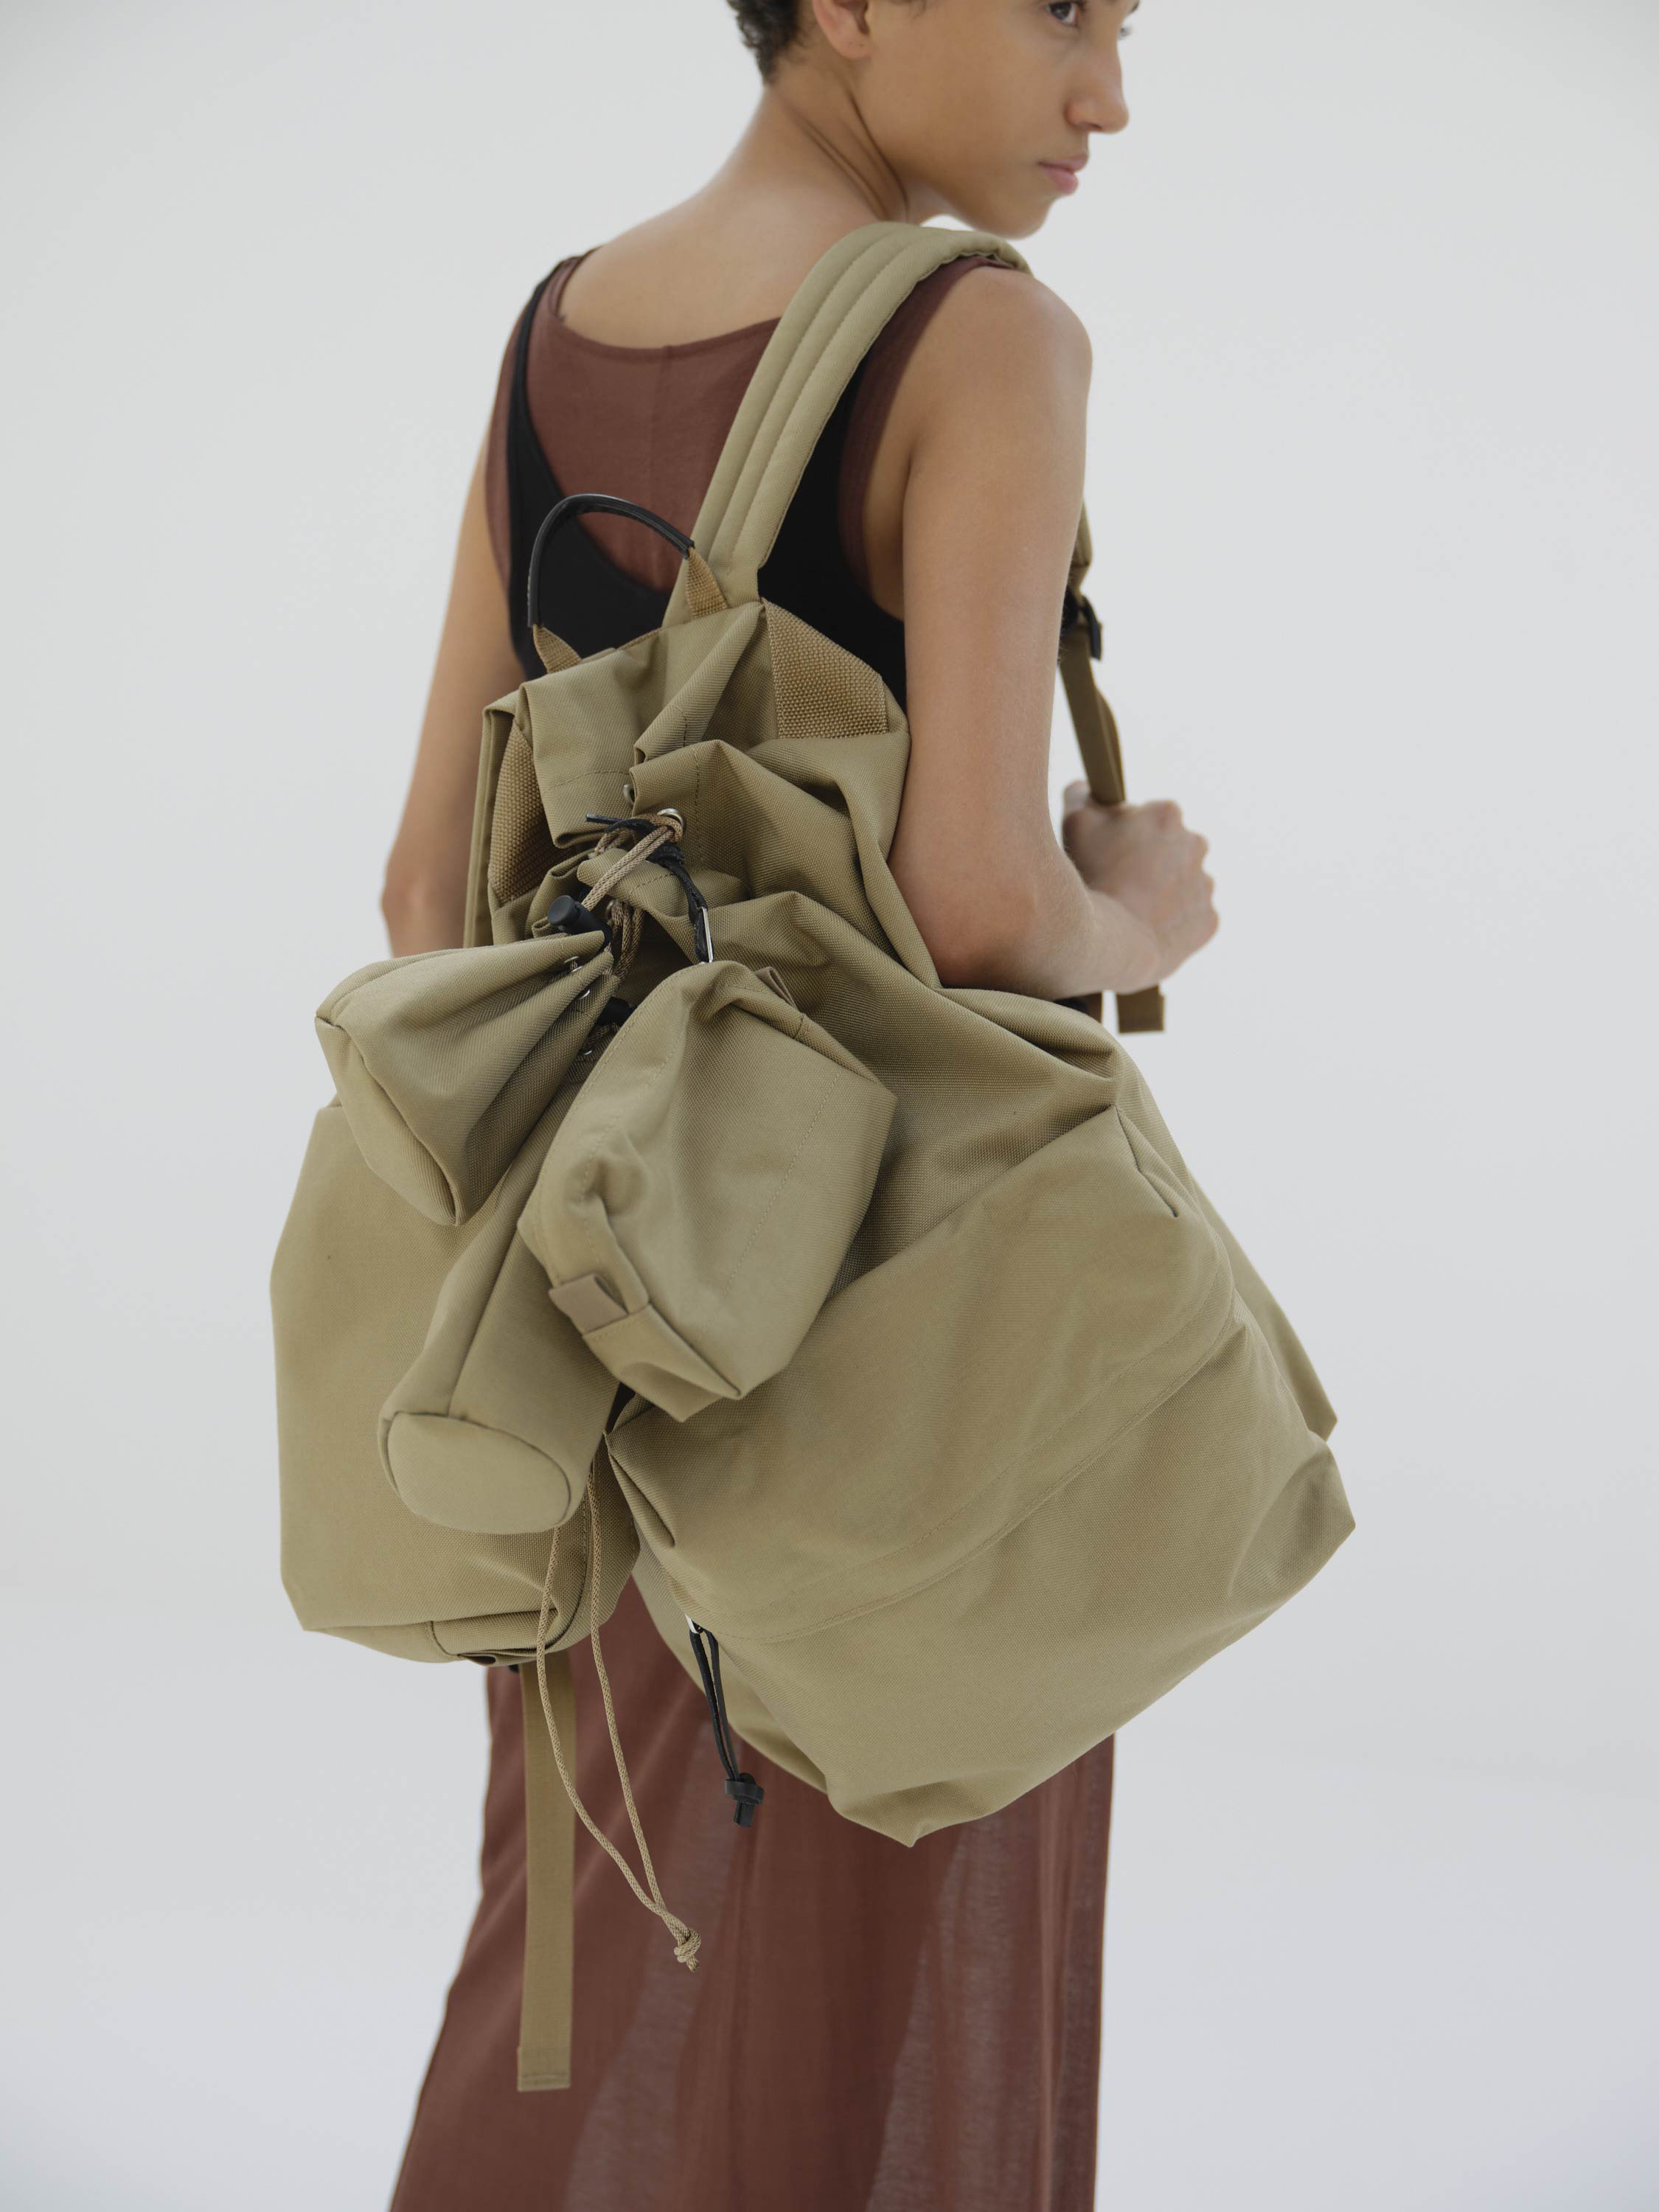 LARGE BACKPACK SET MADE BY AETA 詳細画像 BEIGE 1